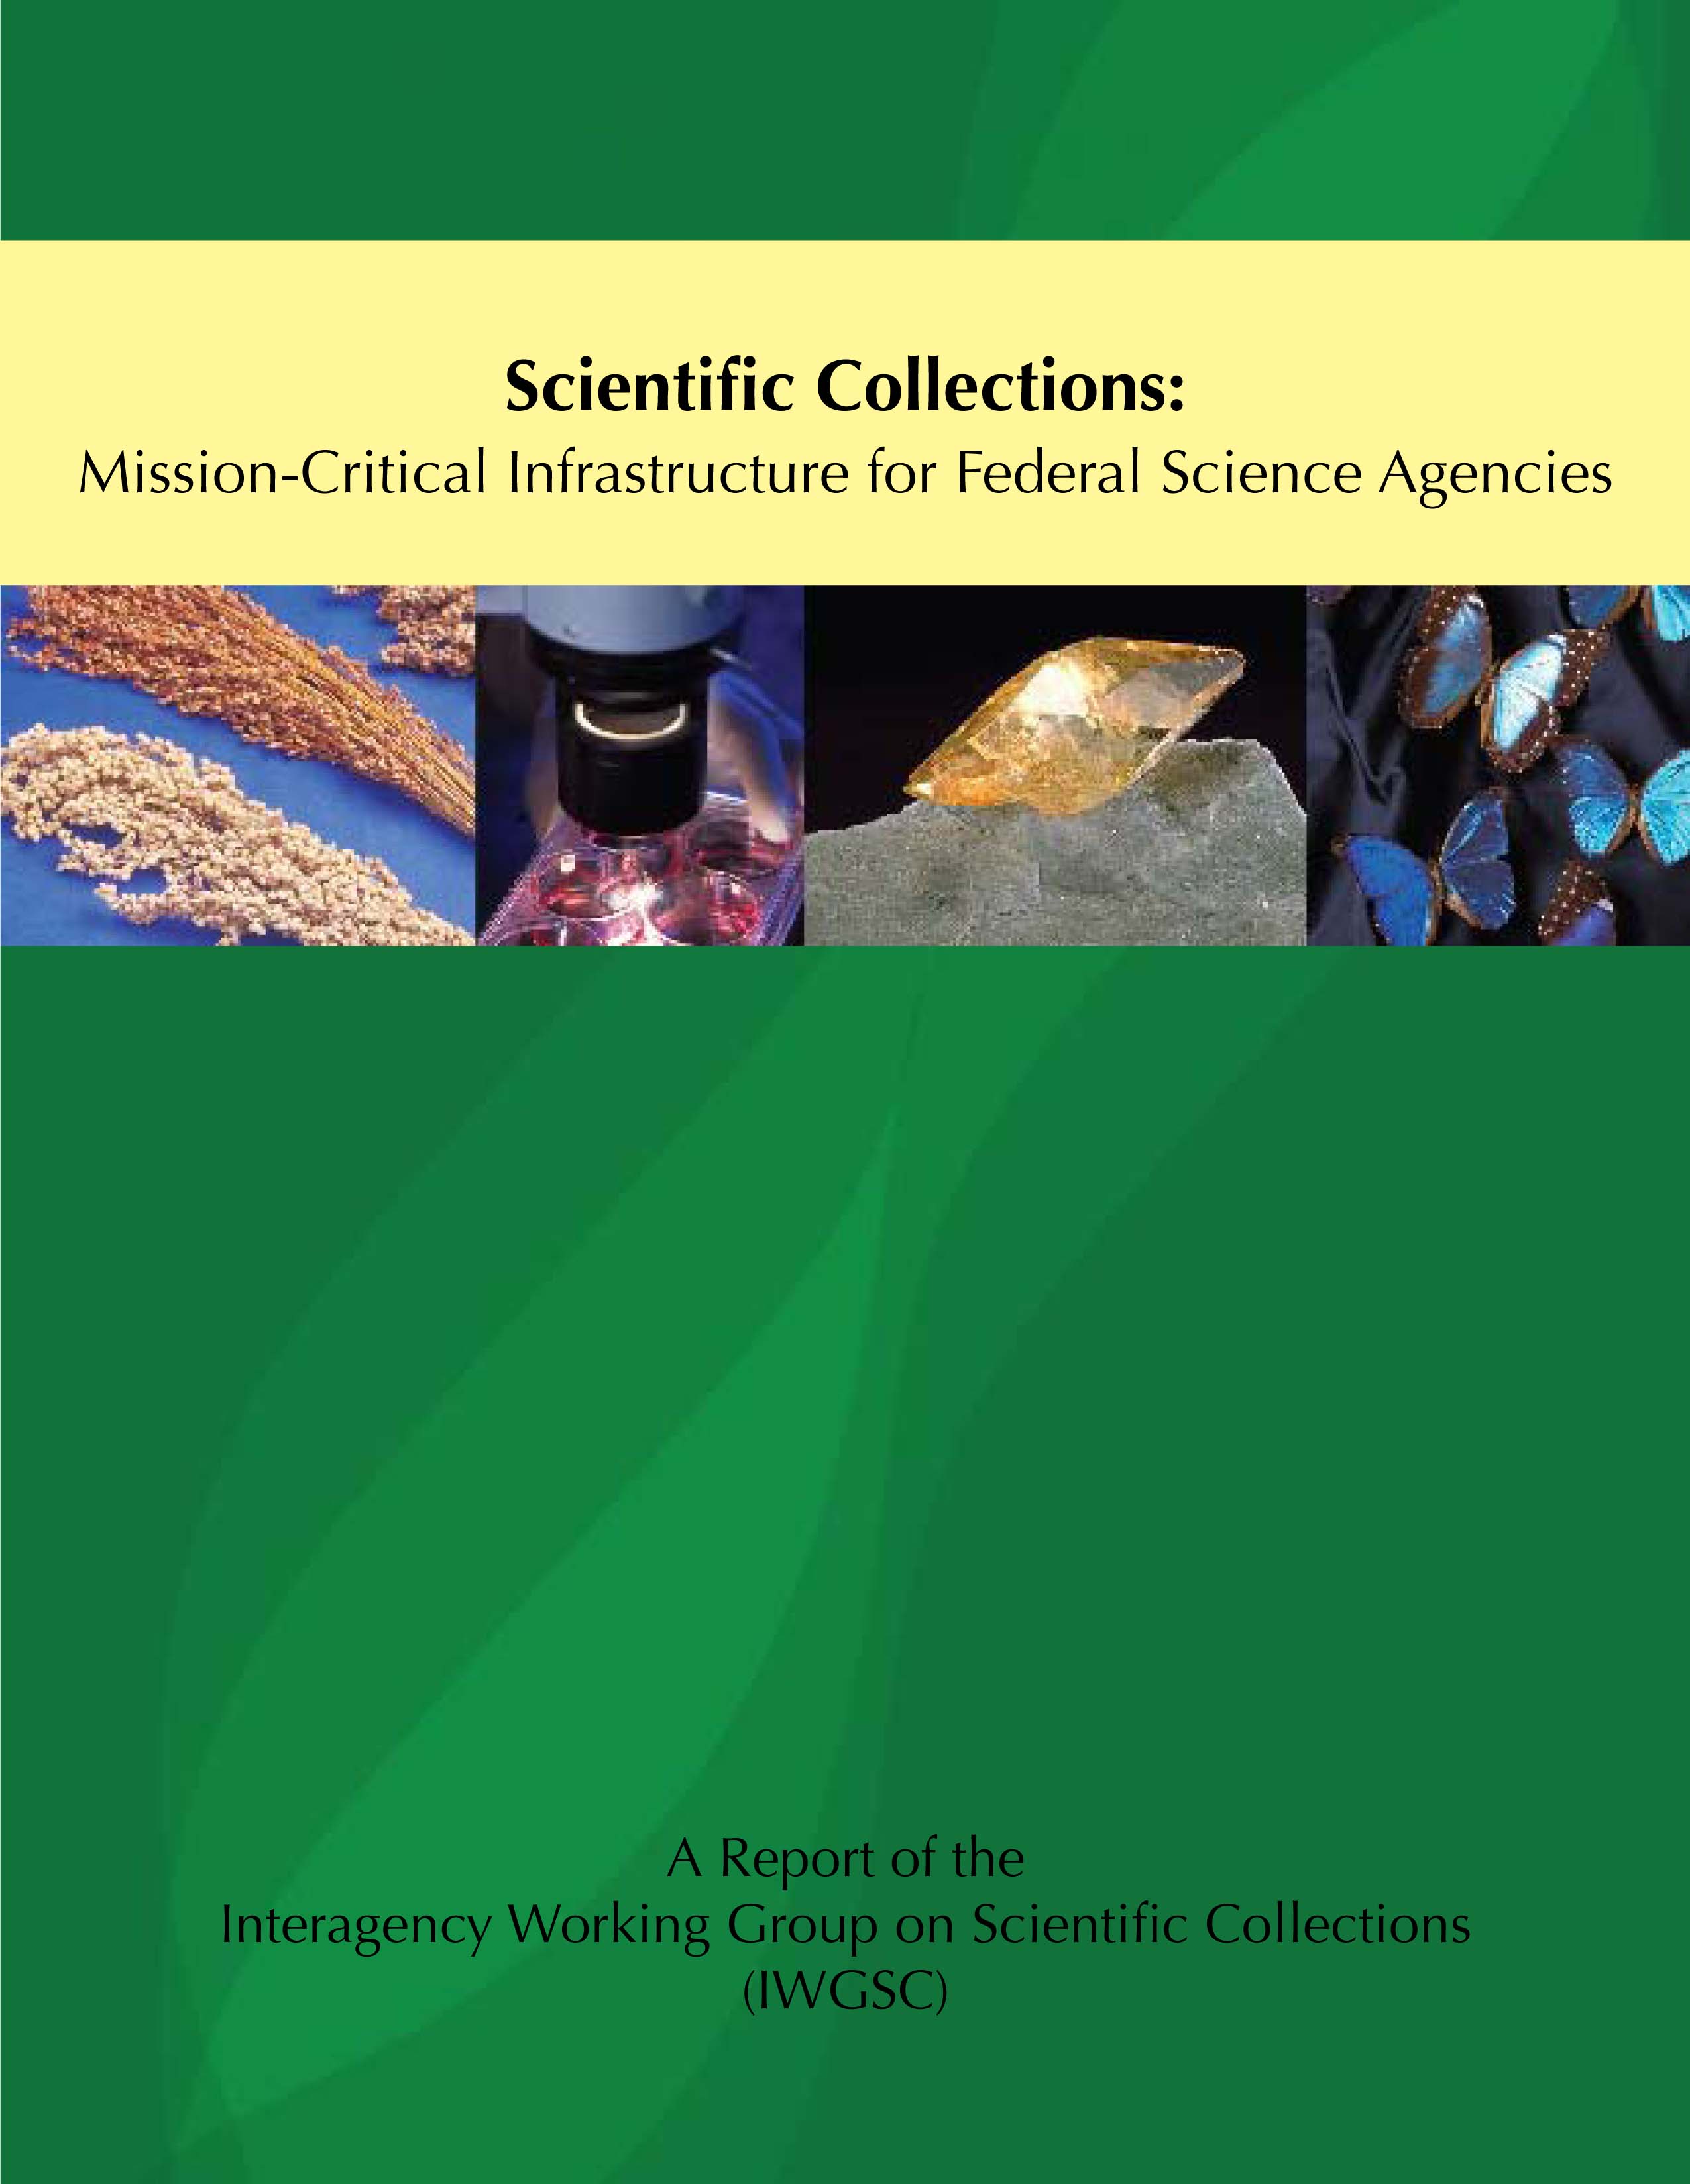 interagency-working-group-on-scientific-collections.jpg